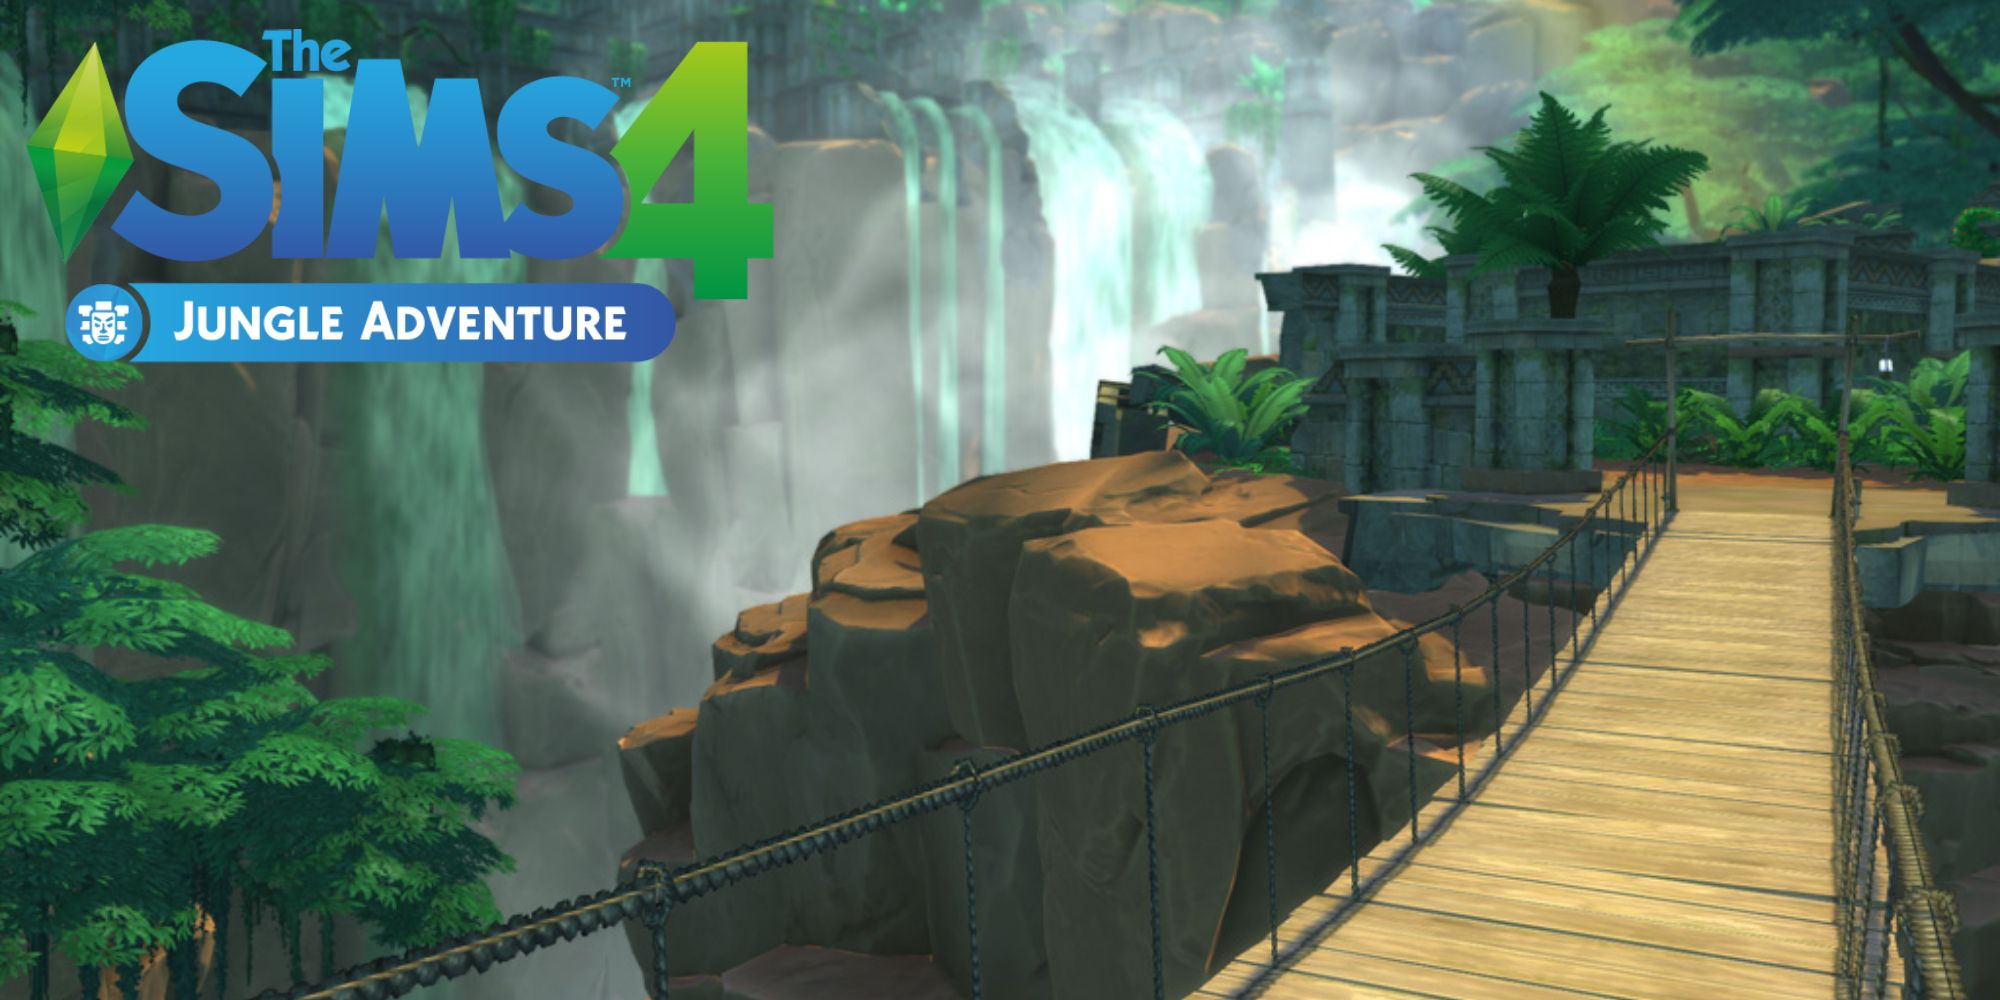 Selvadorada, from the Jungle Adventure game pack, is one of the hottest worlds in The Sims 4